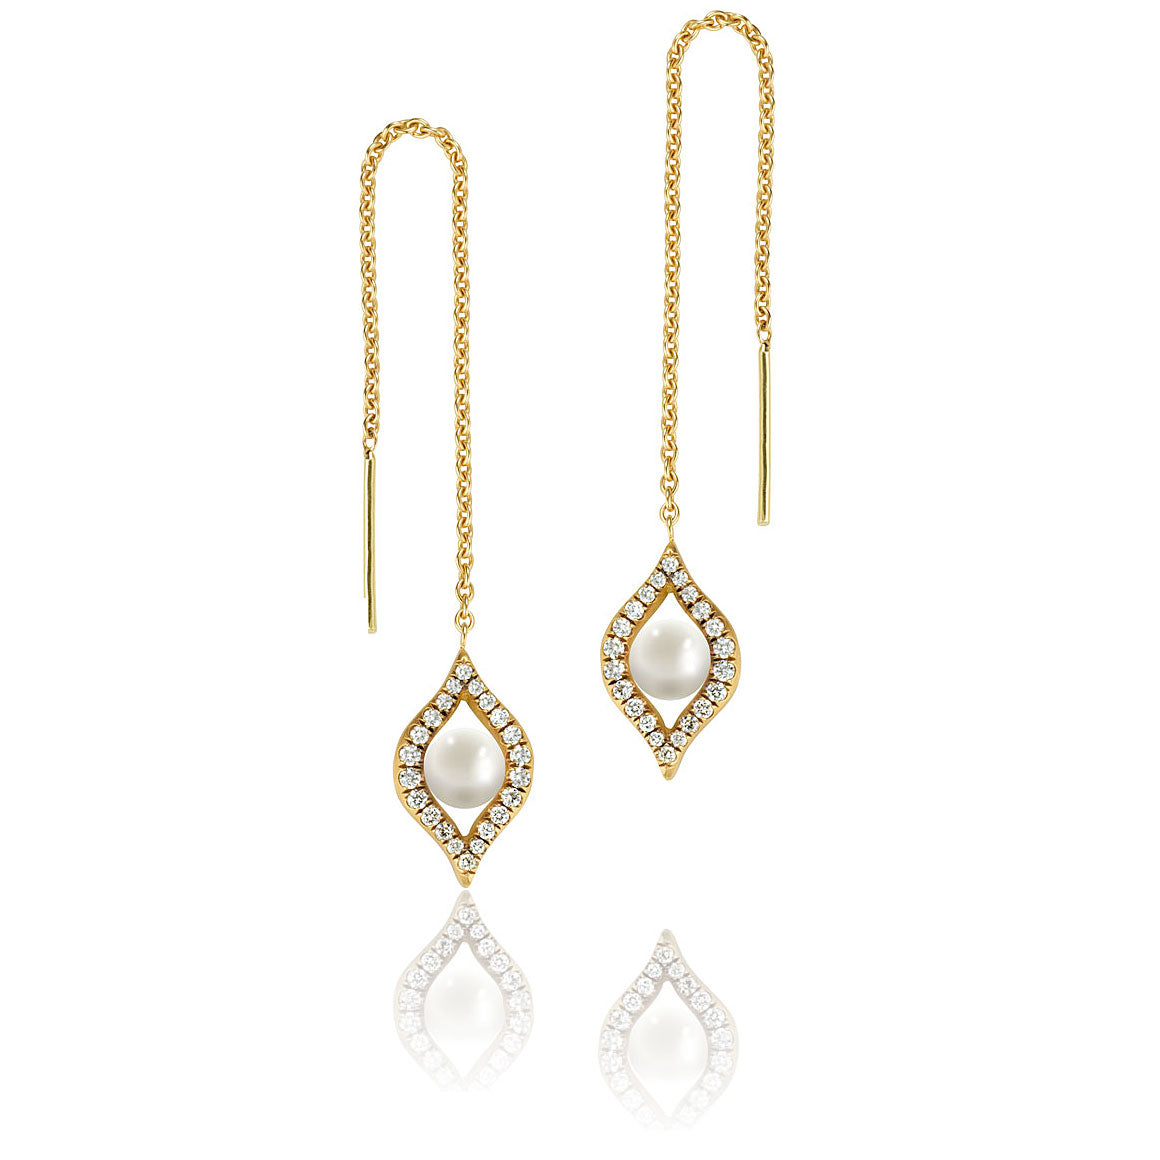 Elli gold pearl earrings with white diamond pavé on drop chain